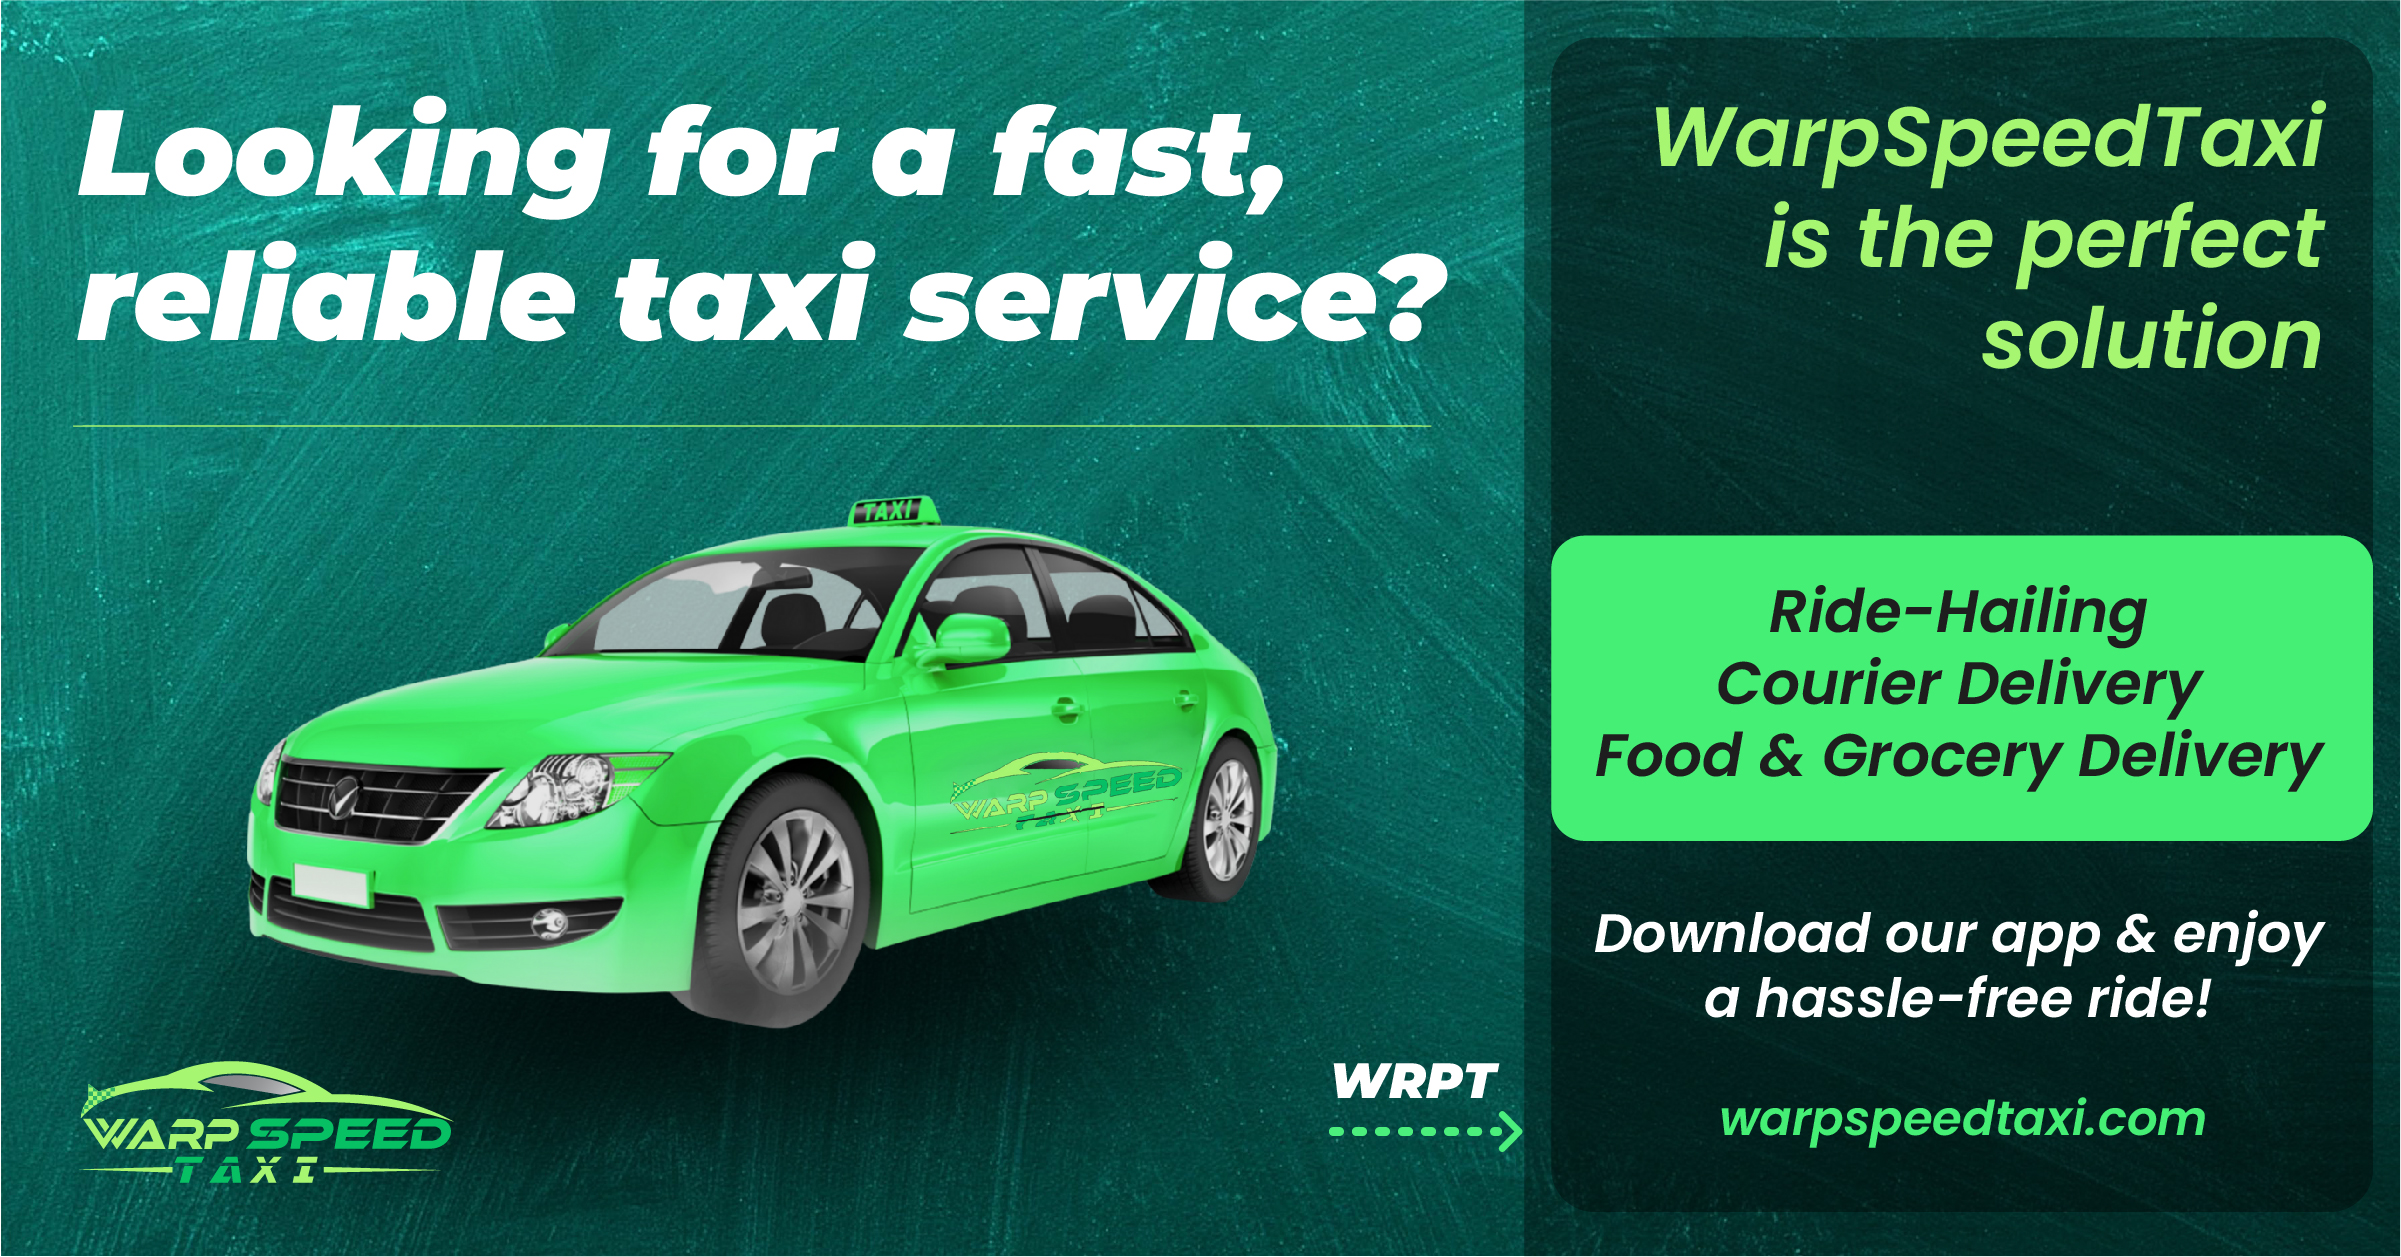 WarpSpeedTaxi - The Perfect Solution